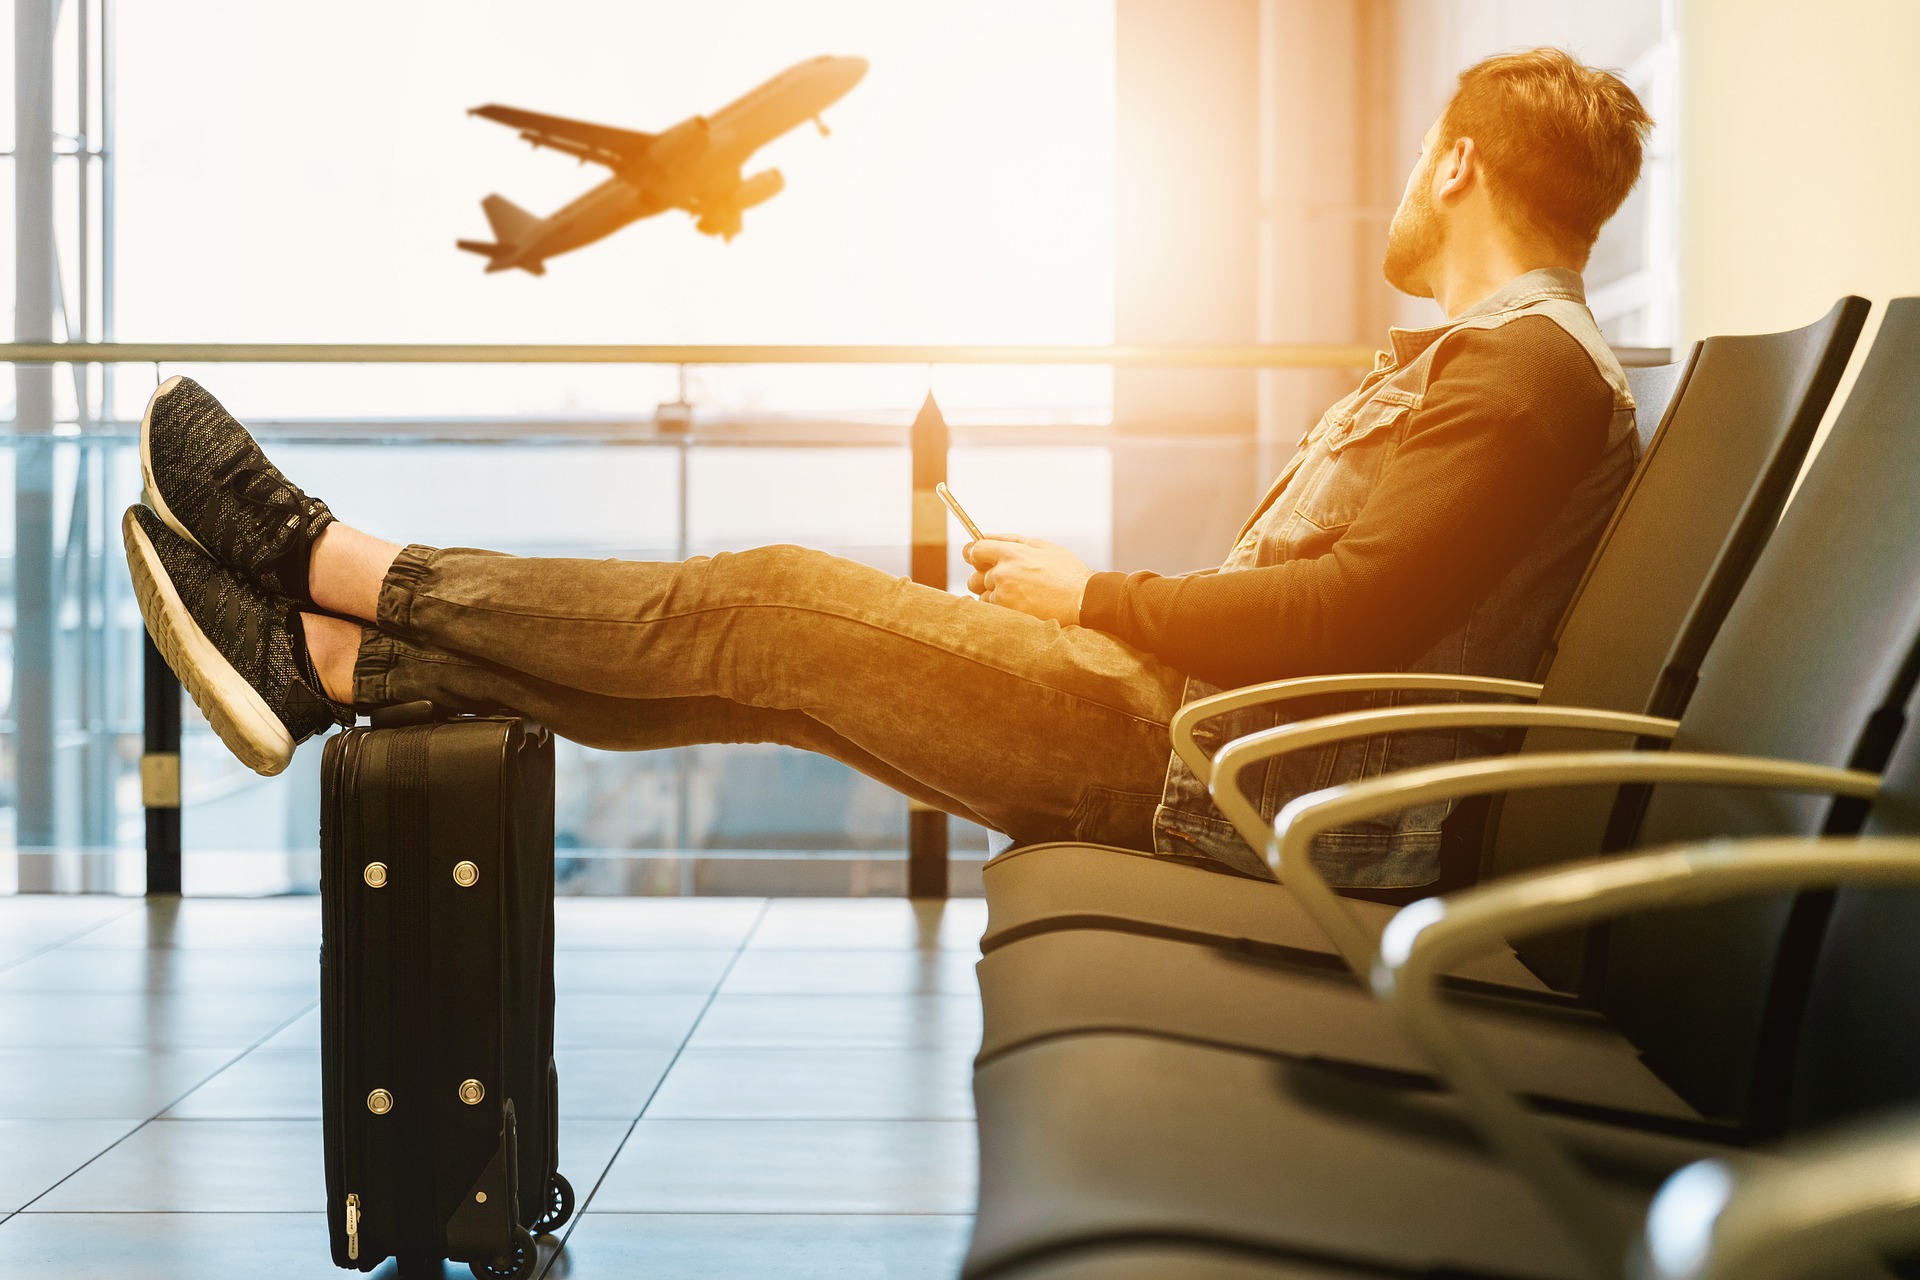 EU261 Flight Compensation Rules For Delayed And Cancelled Flights